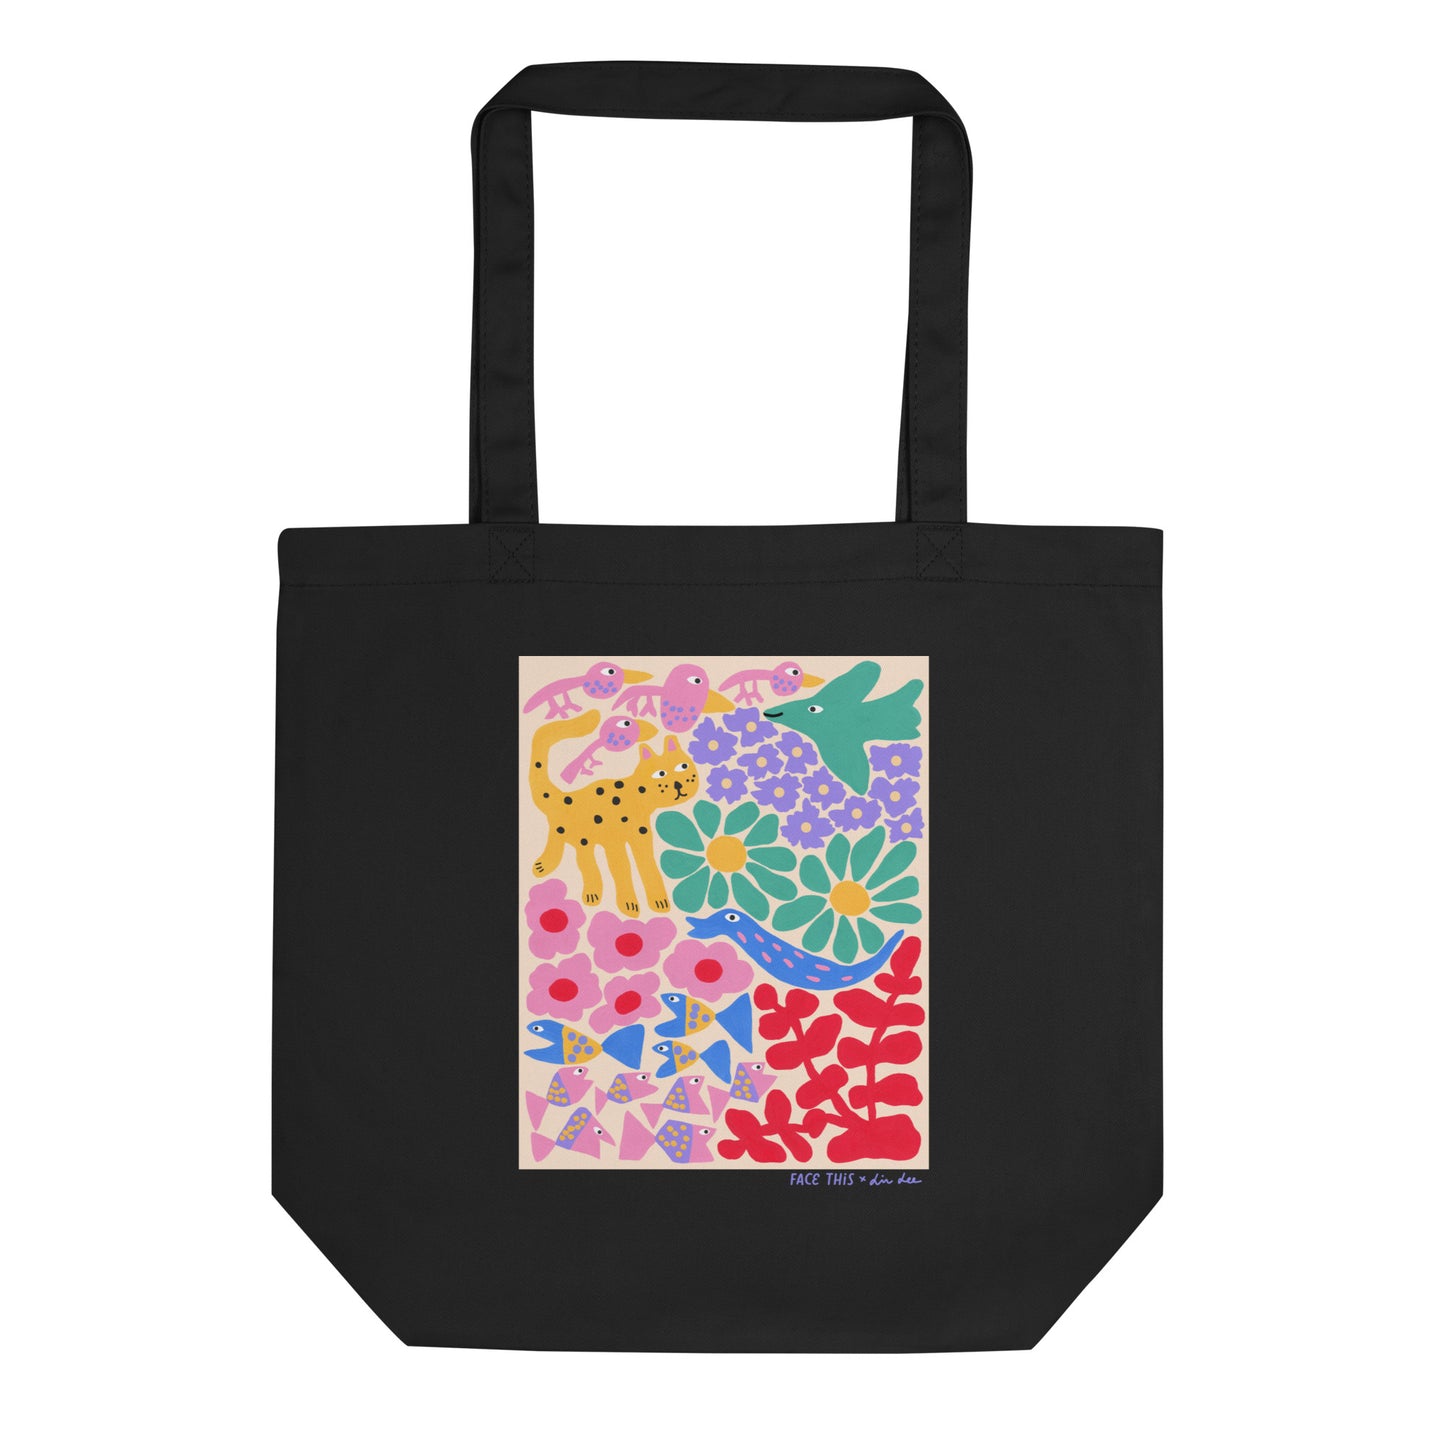 Liv Lee x Face This Tote Bag